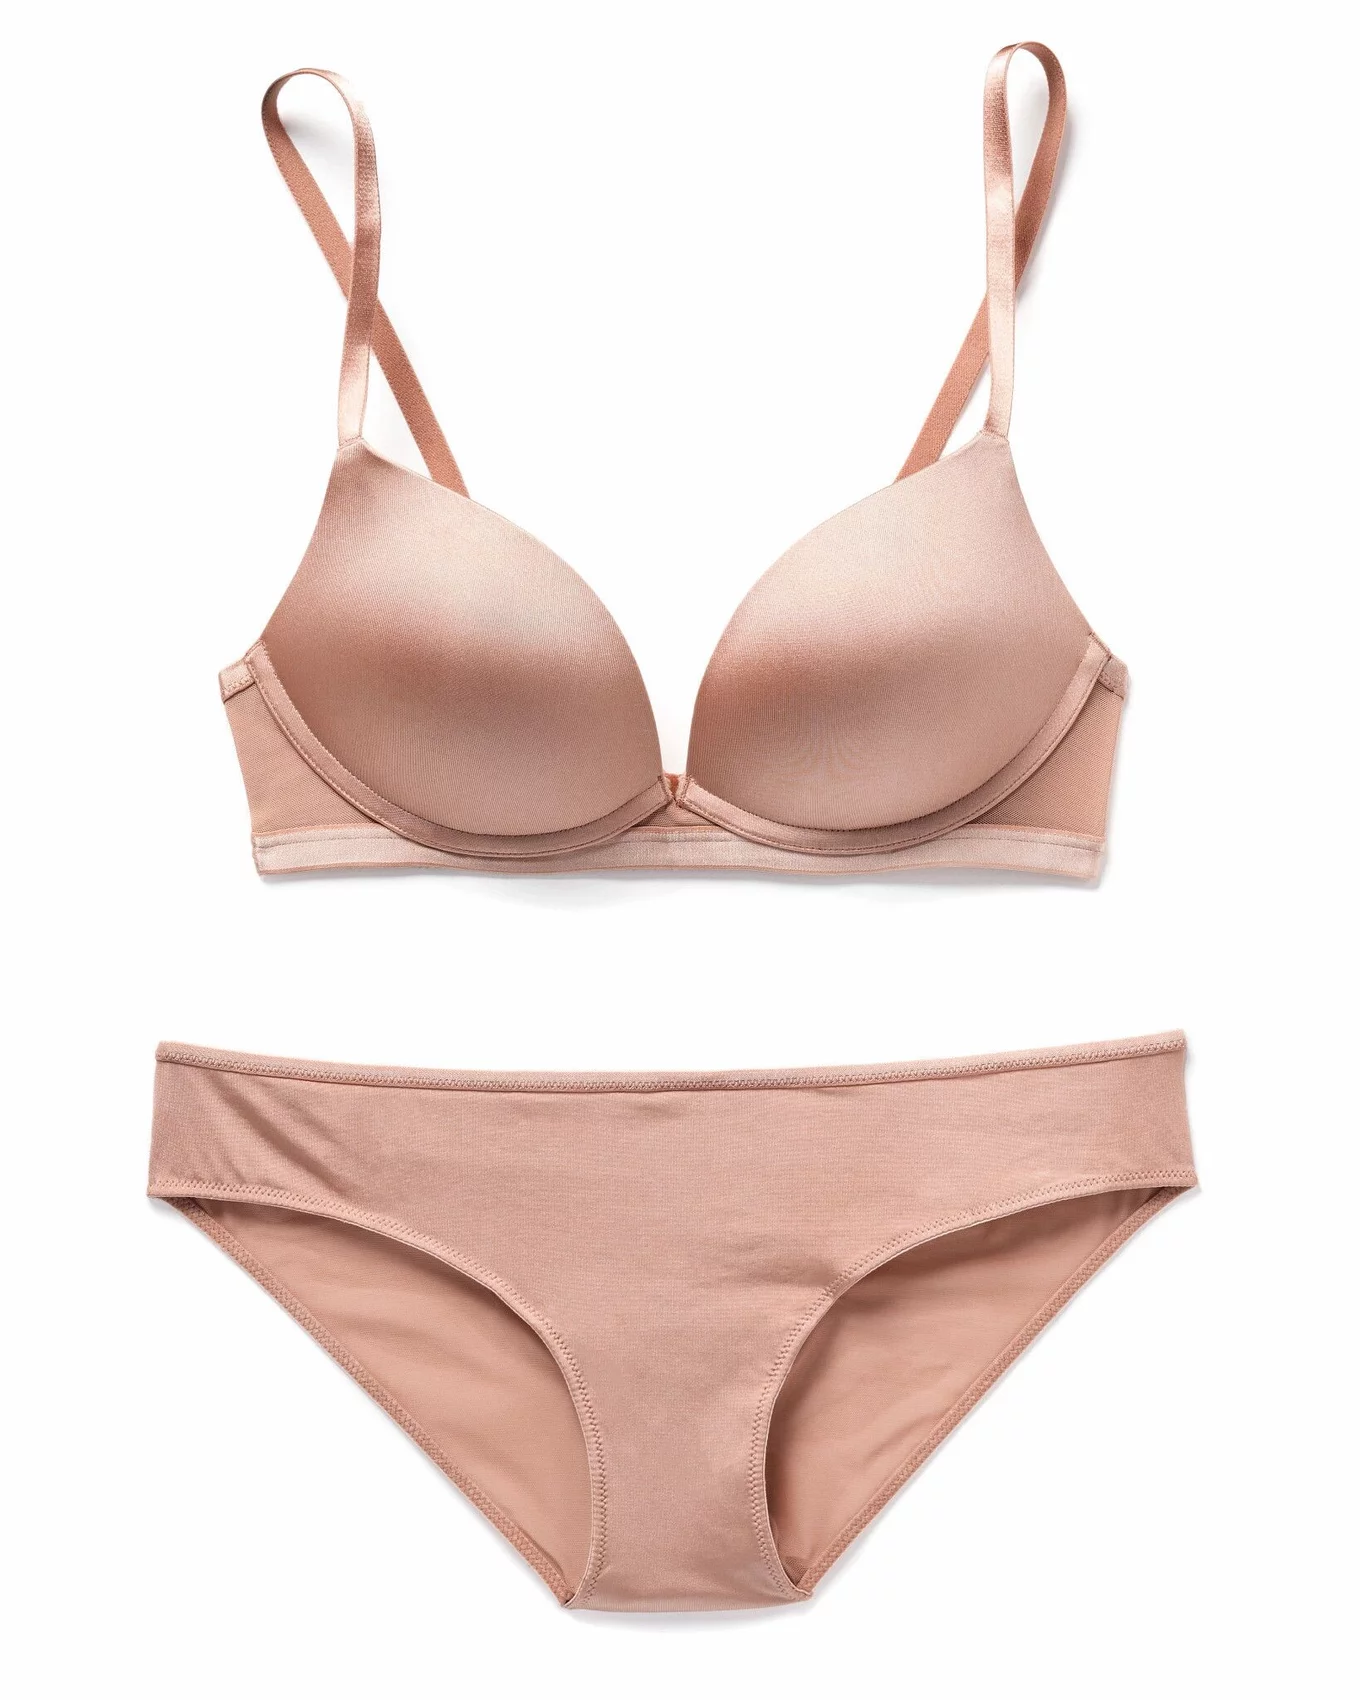 Adore Me Women's Analize Plunge Bra 30A / Tuscany Beige.